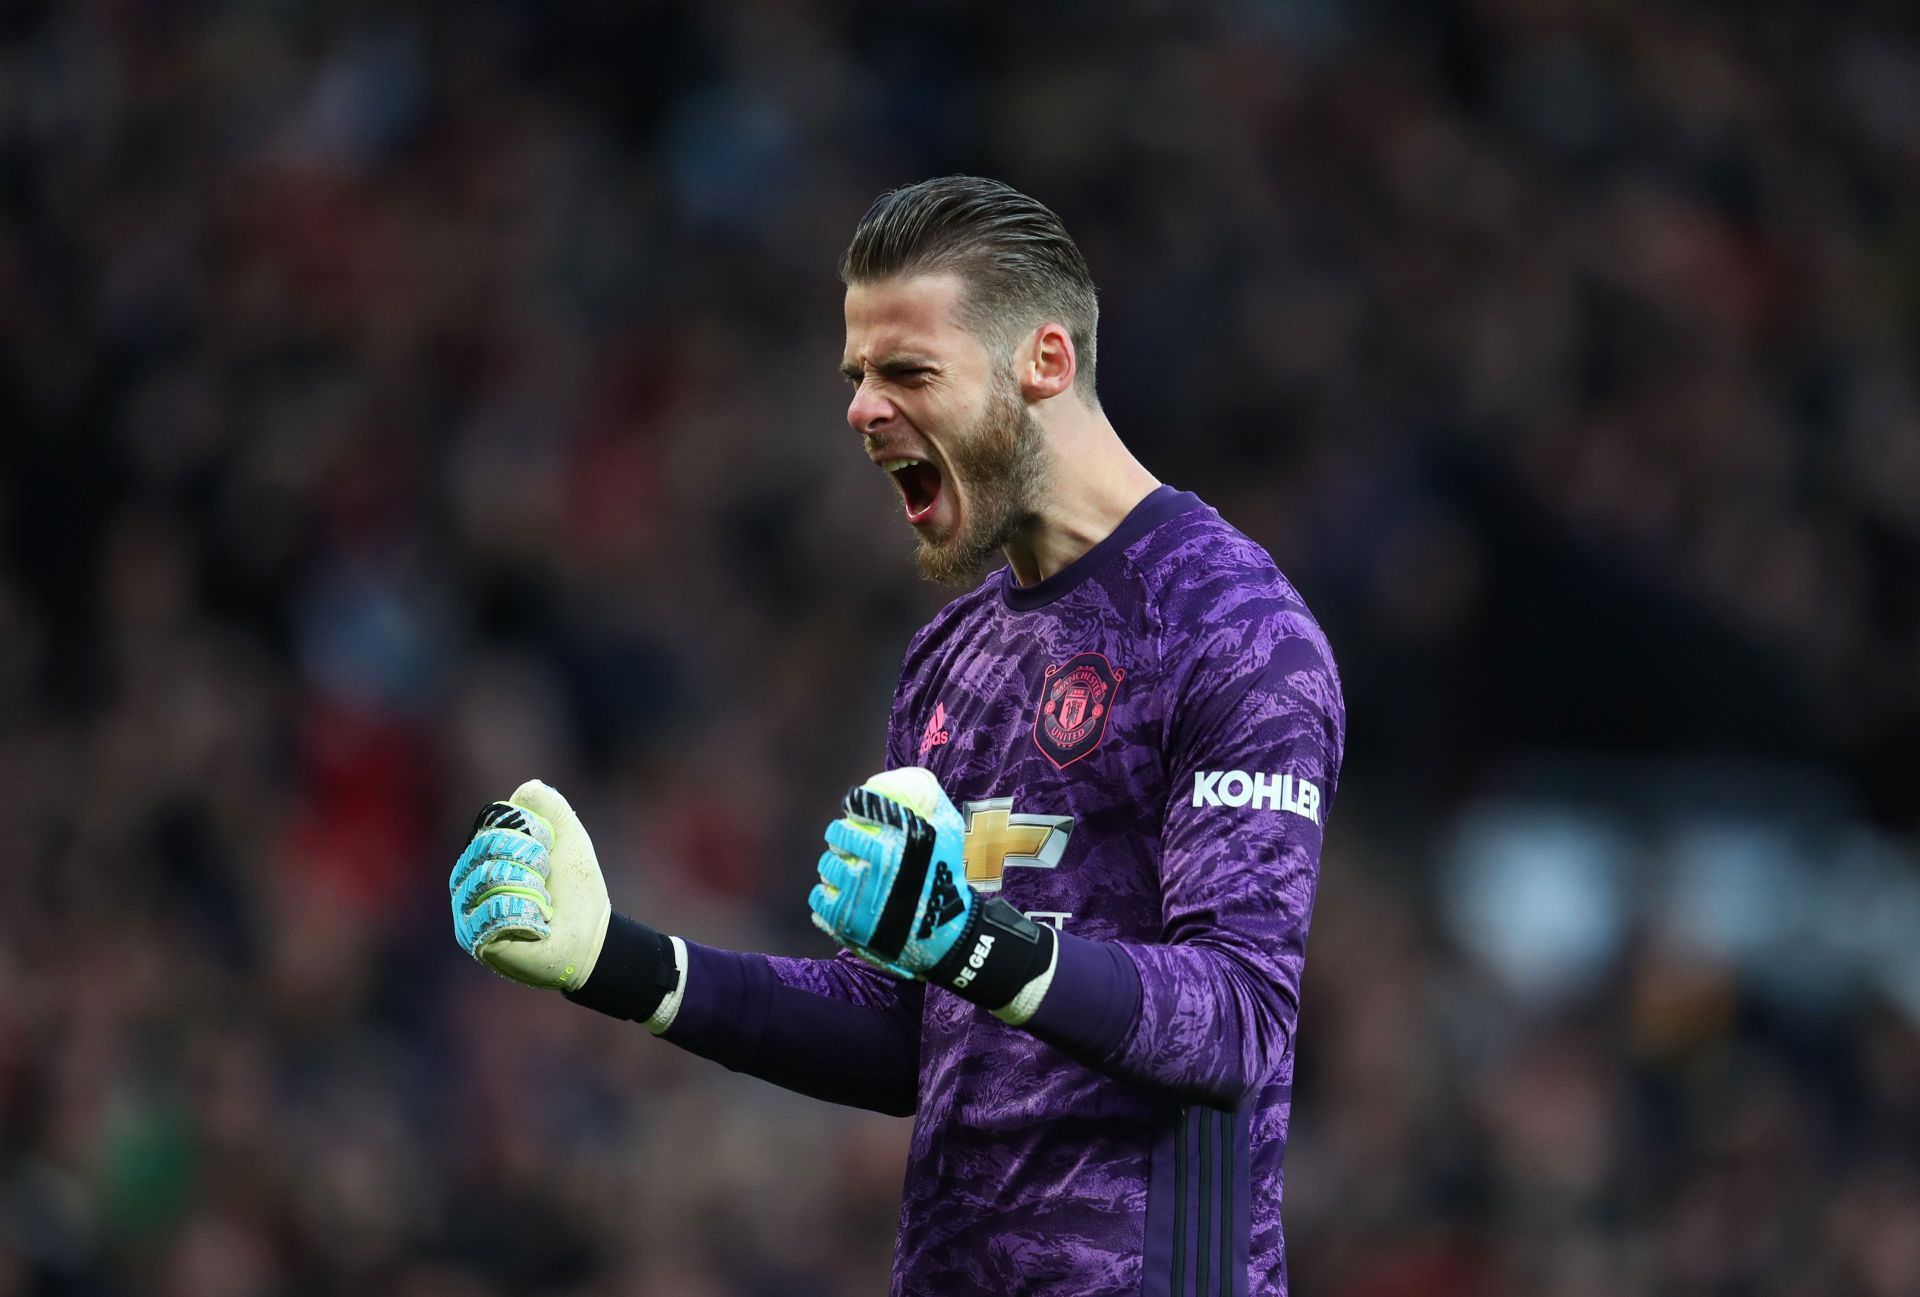 David de Gea is back at his best in the 2021-22 campaign